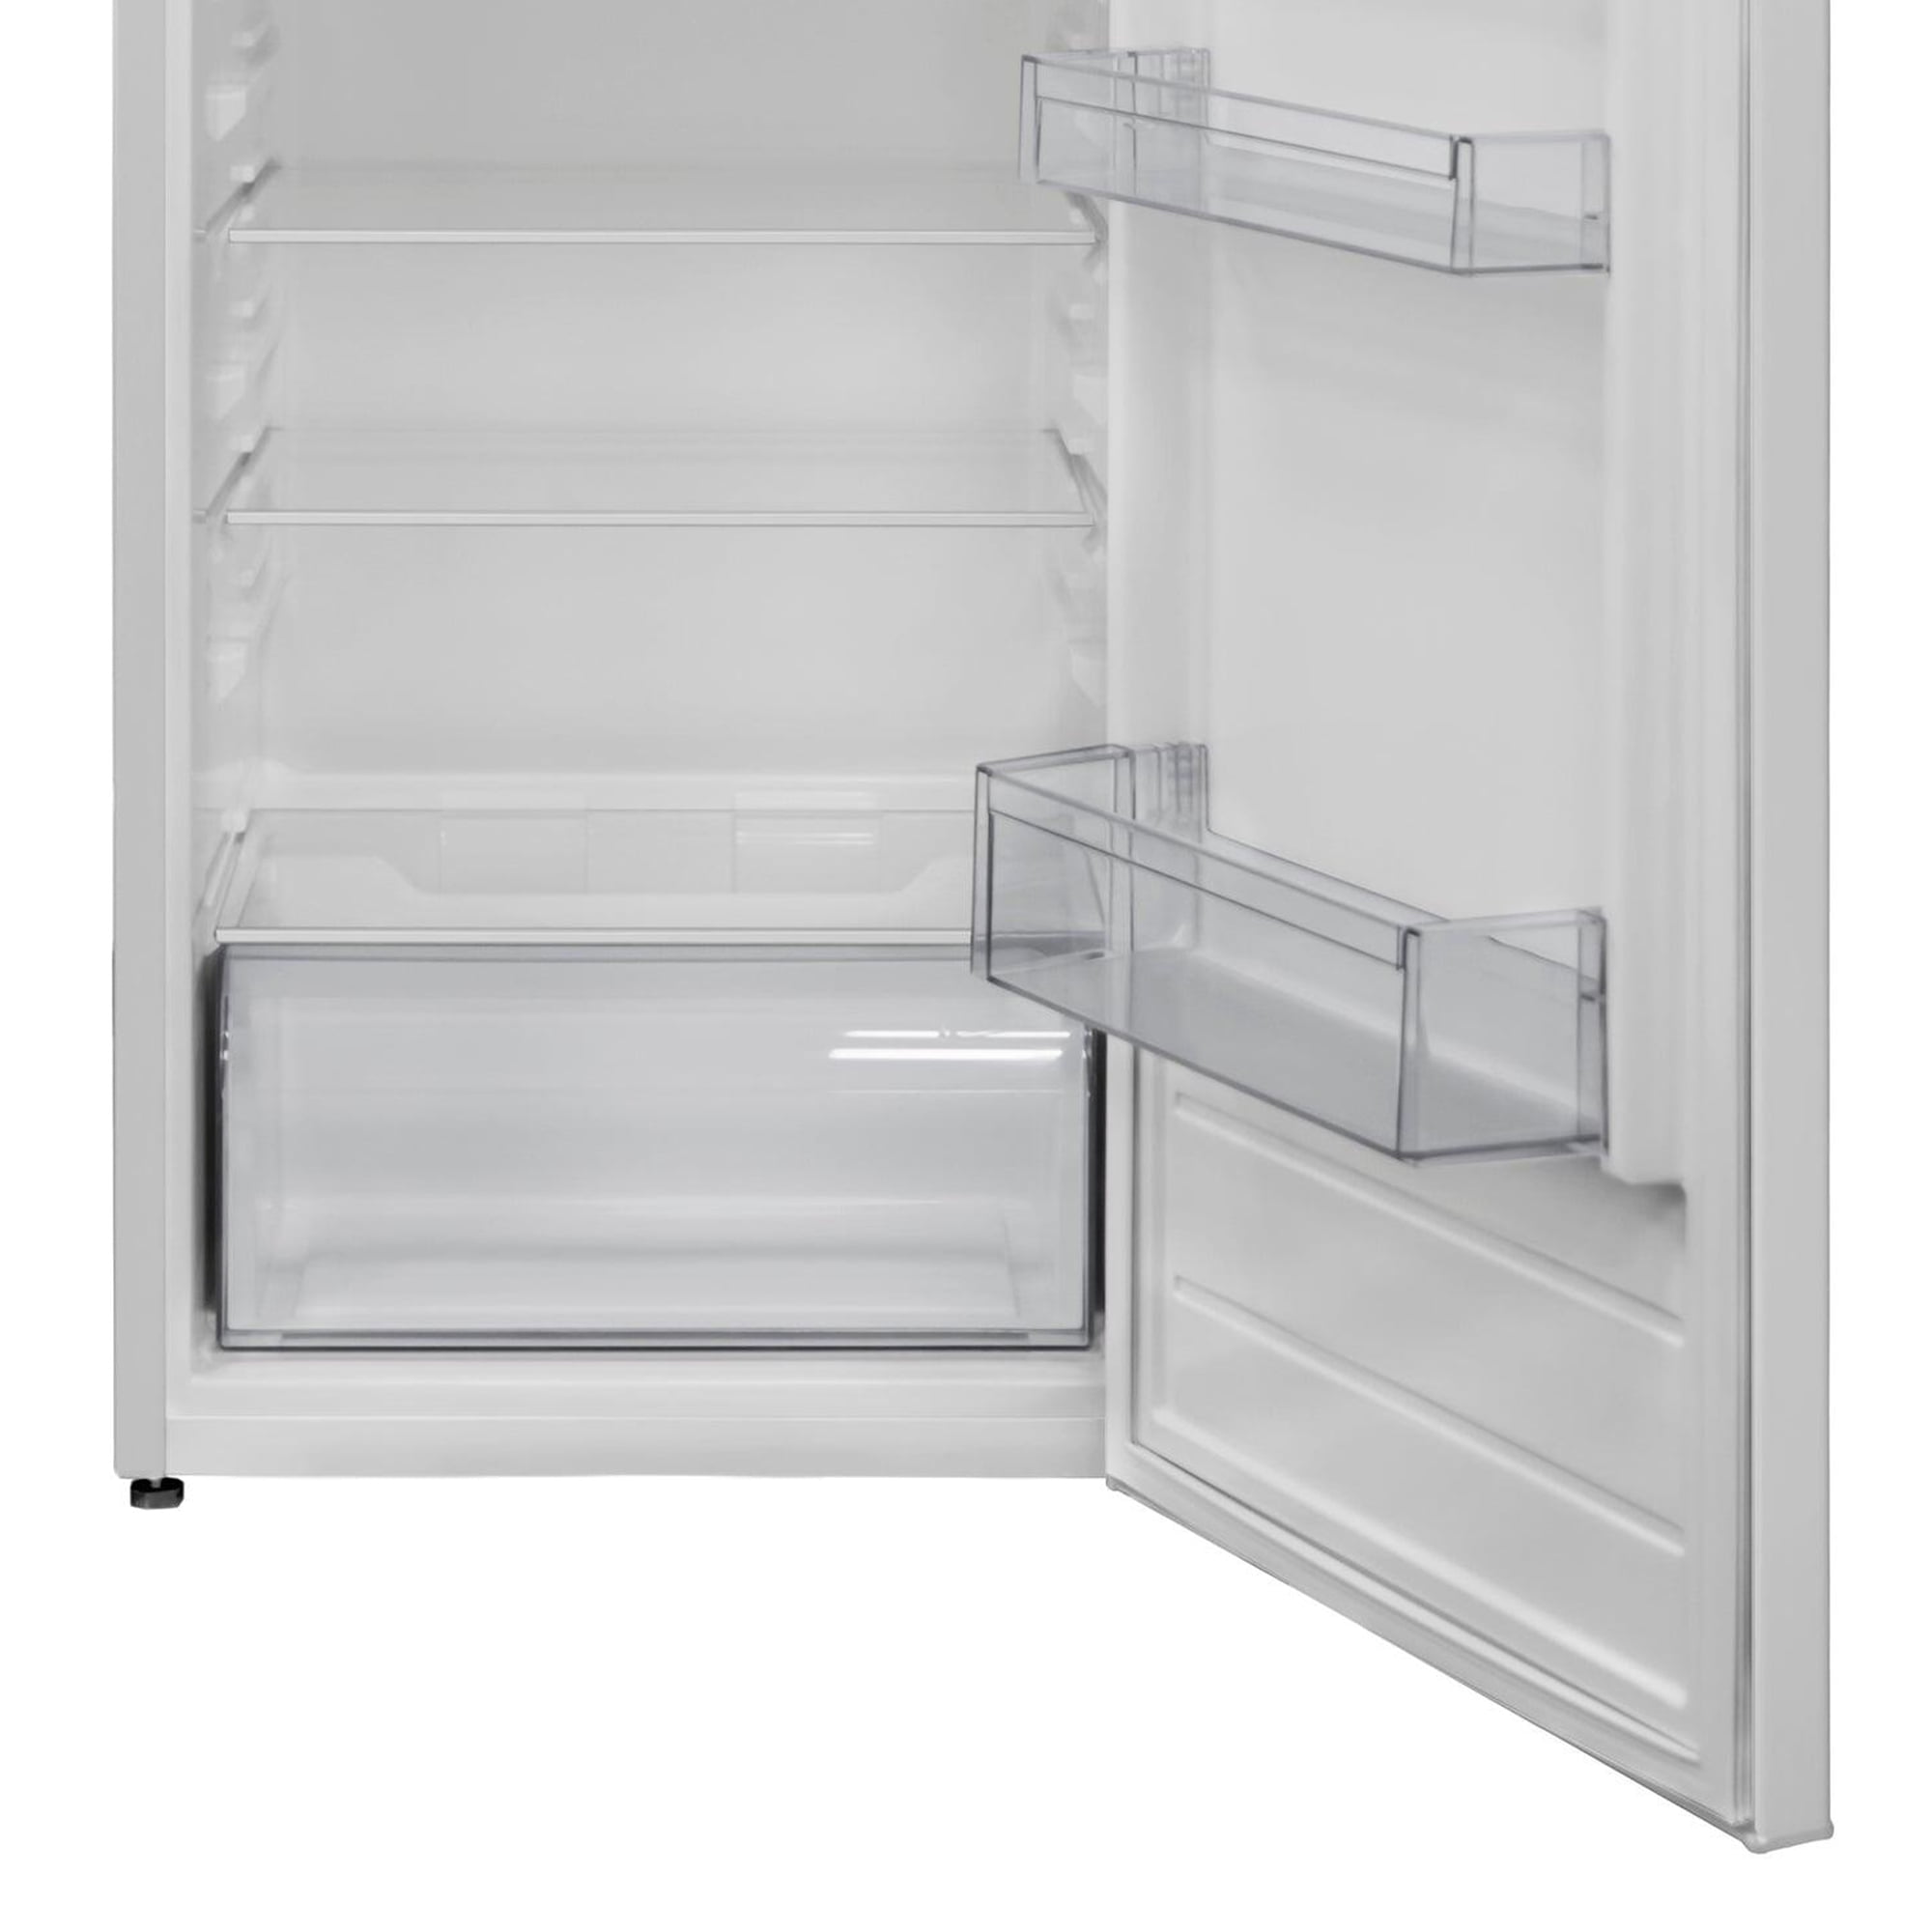 Avanti RM4436SSBUN3 4.4 Cu. Ft. Compact Refrigerator and 0.7 CuFt Microwave  - Stainless Steel